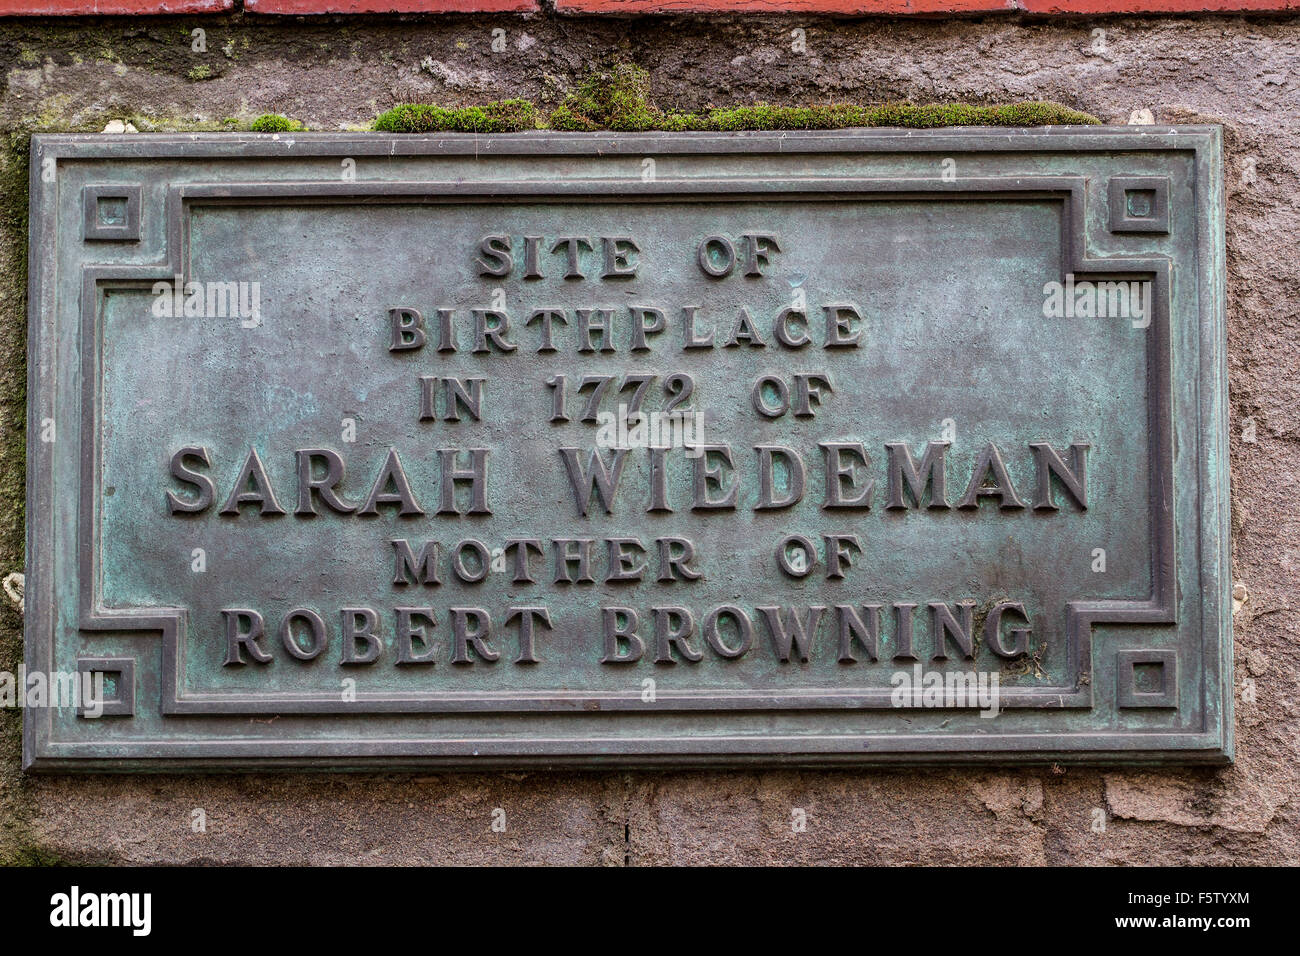 Birthplace site of Sarah Wiedeman (1772-1849), mother of Robert Browning (1812-1889) along 99 Seagate in Dundee, UK Stock Photo